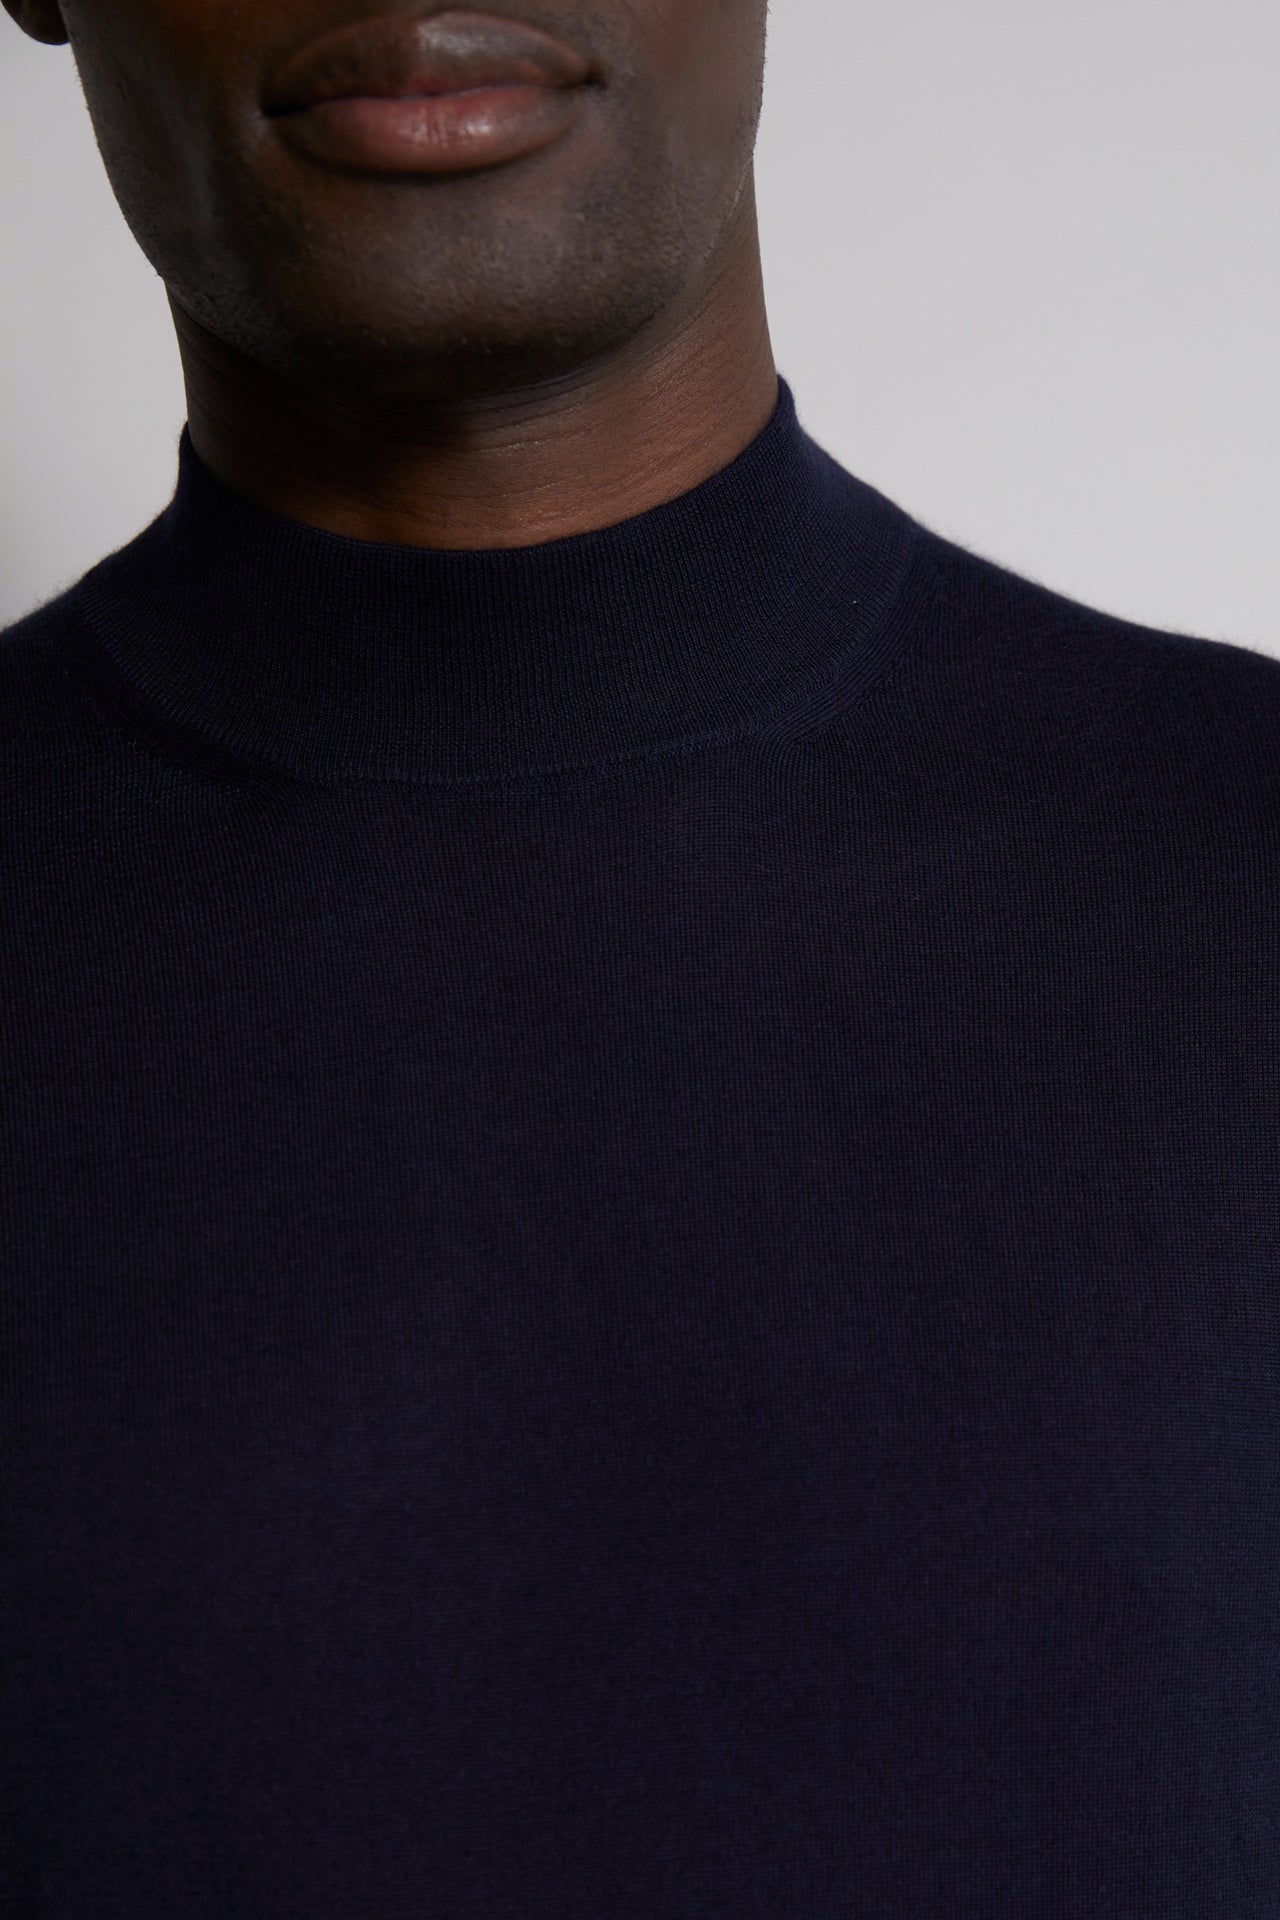 Derby Special cashmere silk mock-neck in iconic colors